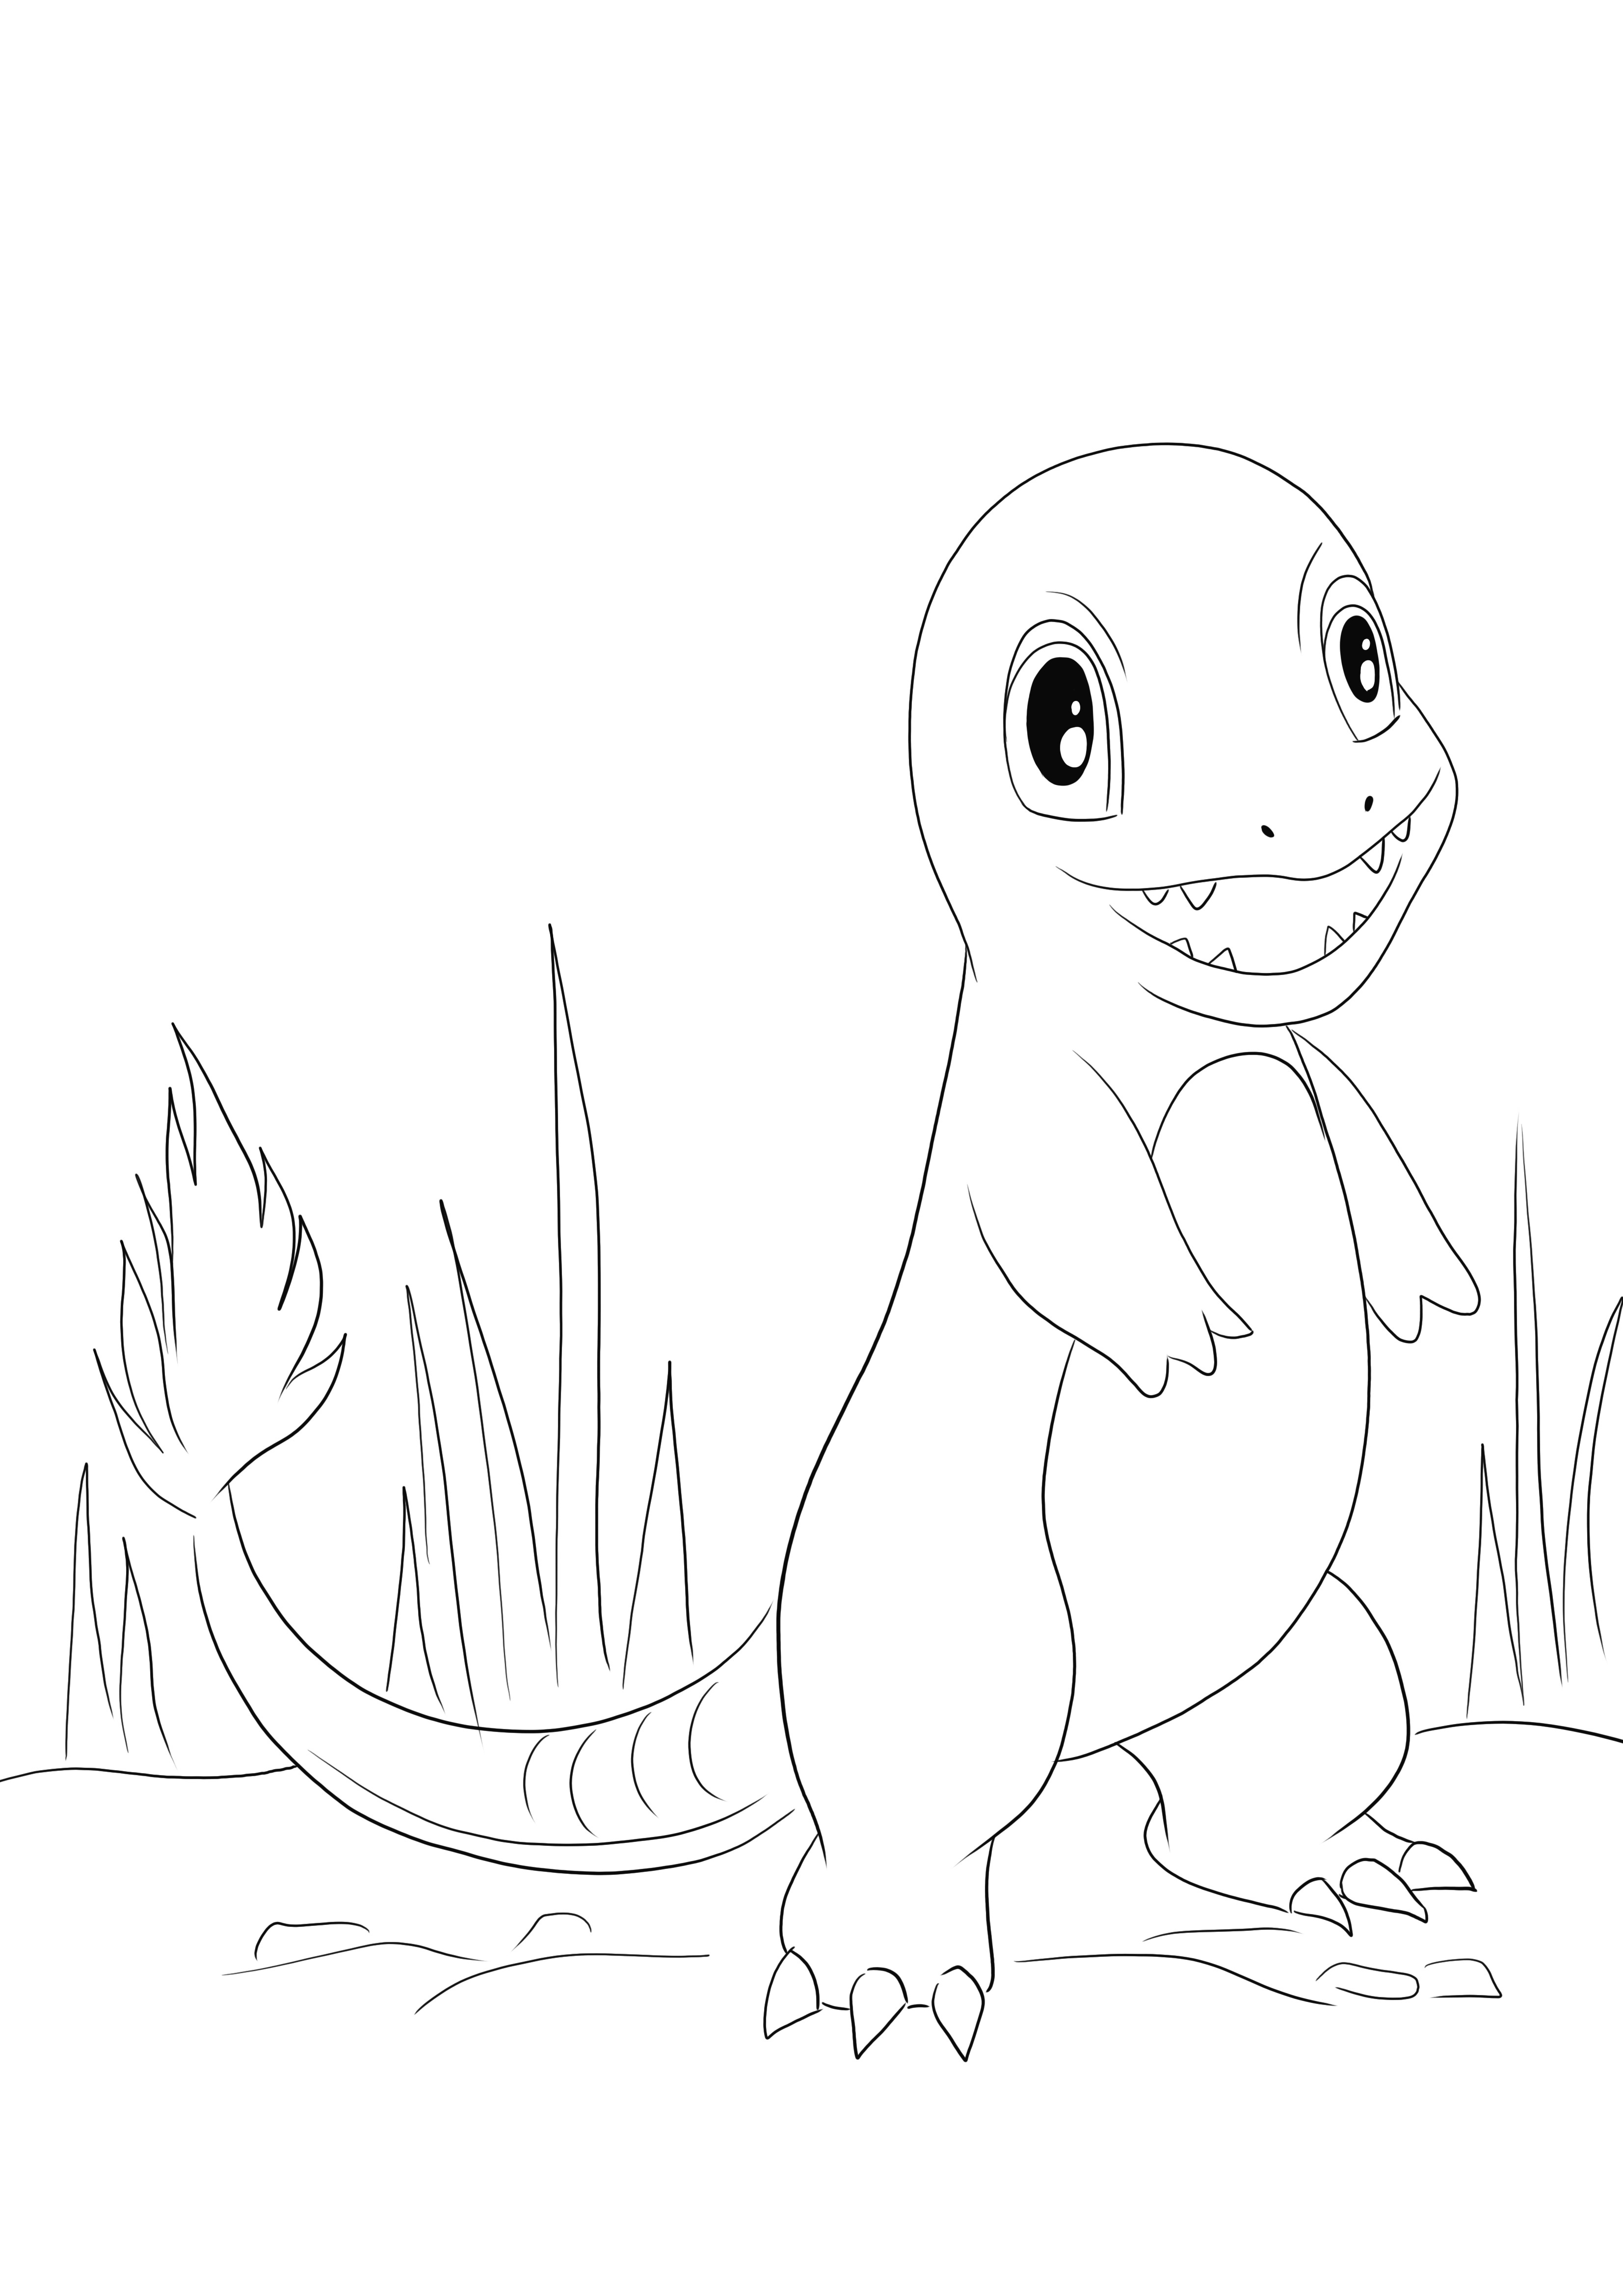 Here is a free coloring image of Charmander from the Pokémon game to print